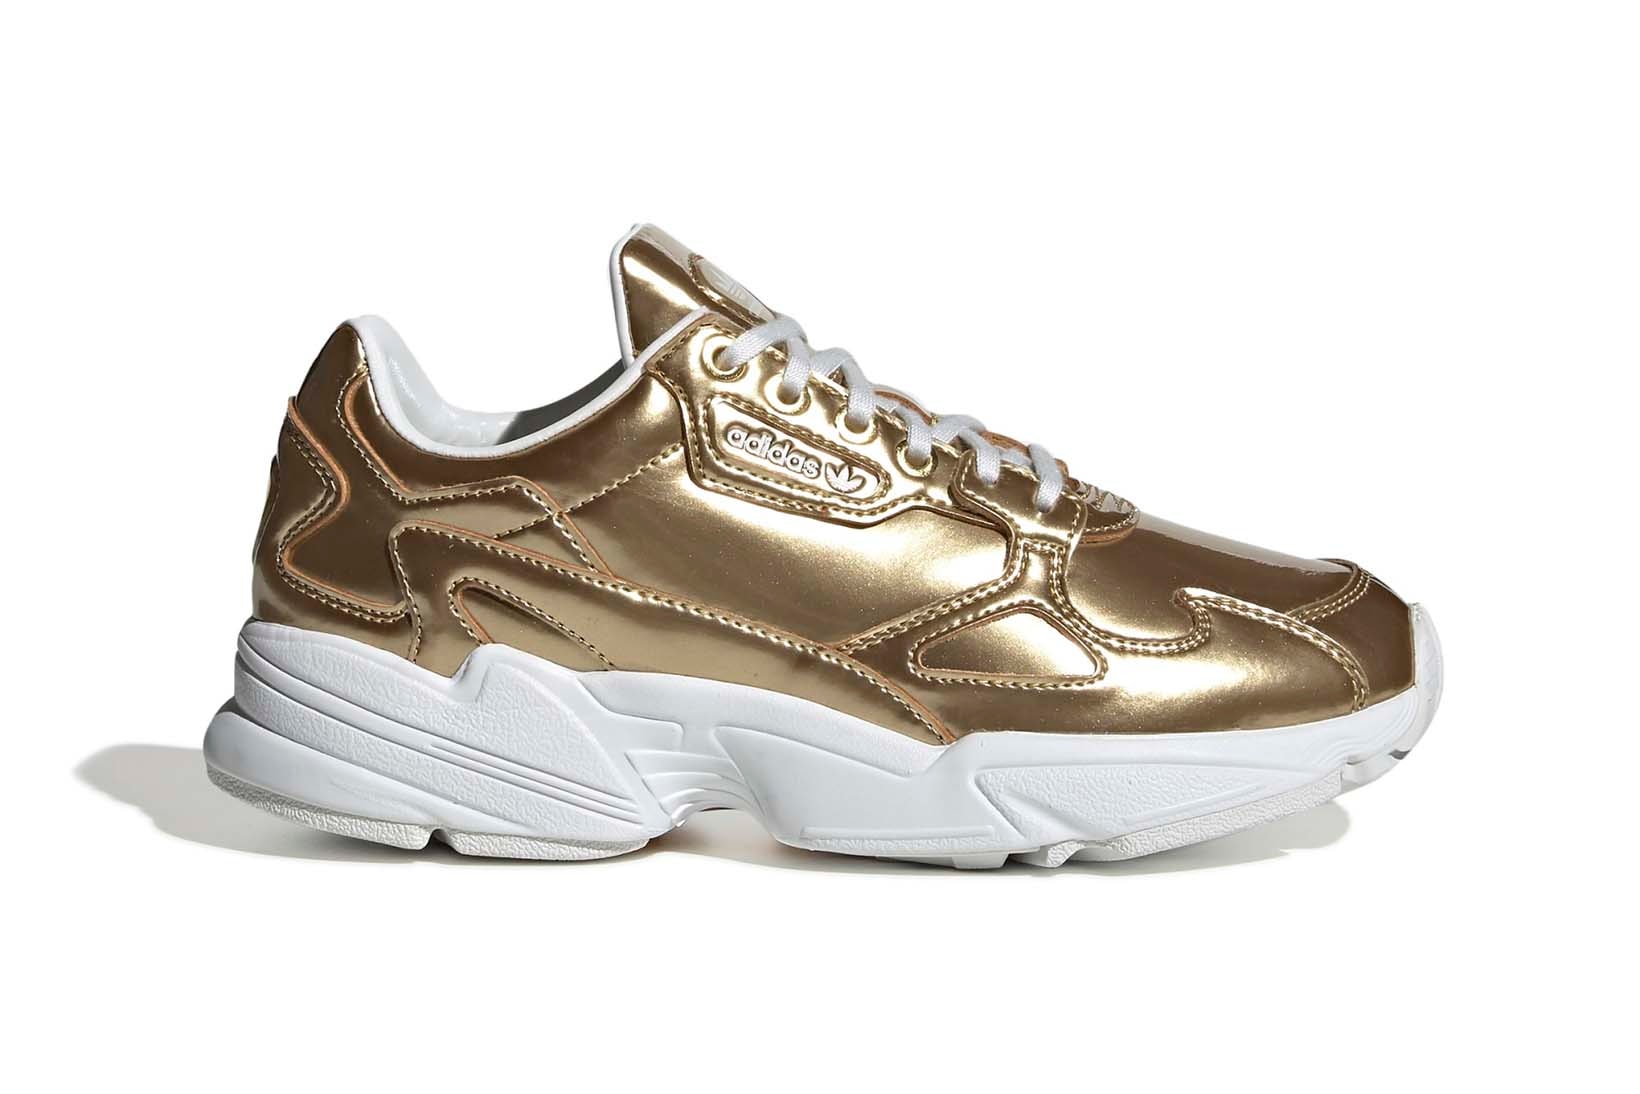 adidas Originals Falcon Metallic Silver Gold Womens Ladies Girls Chunky Sneakers Trainers